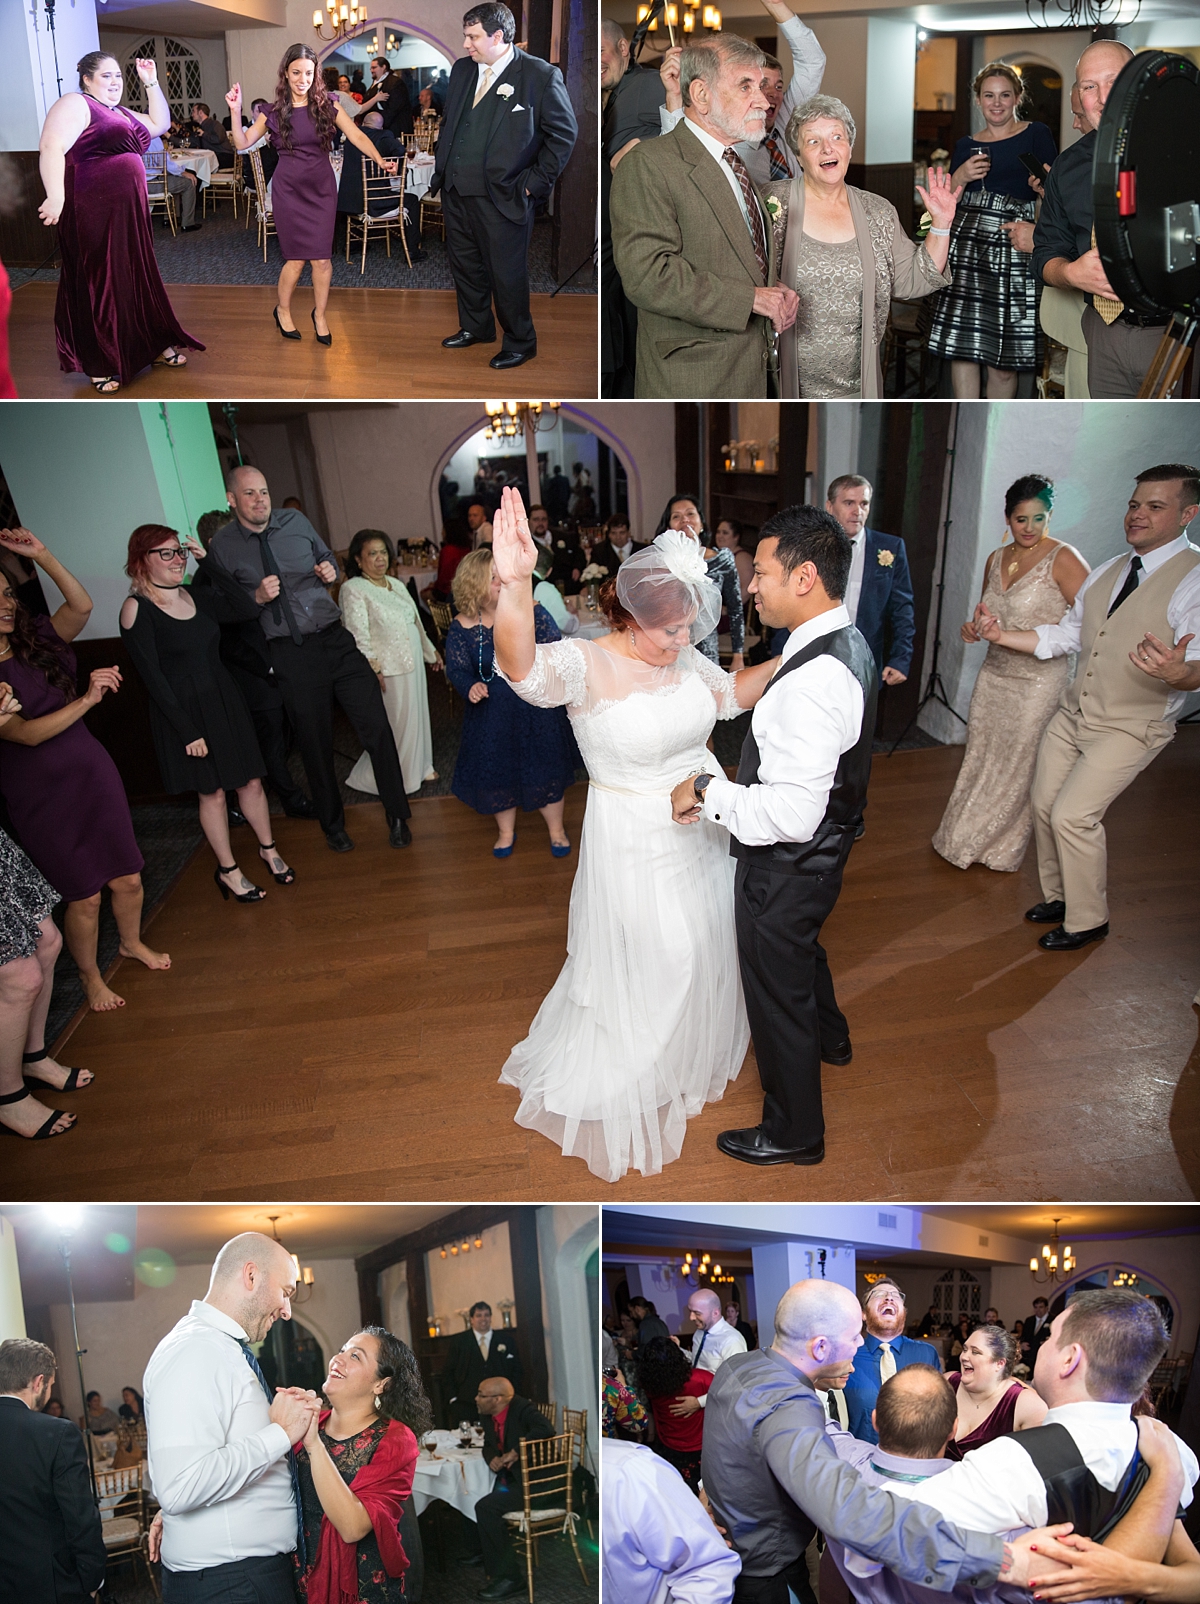 wedding reception guests dancing, newlyweds dancing, beardslee castle, little falls, ny, sarah heppell photography